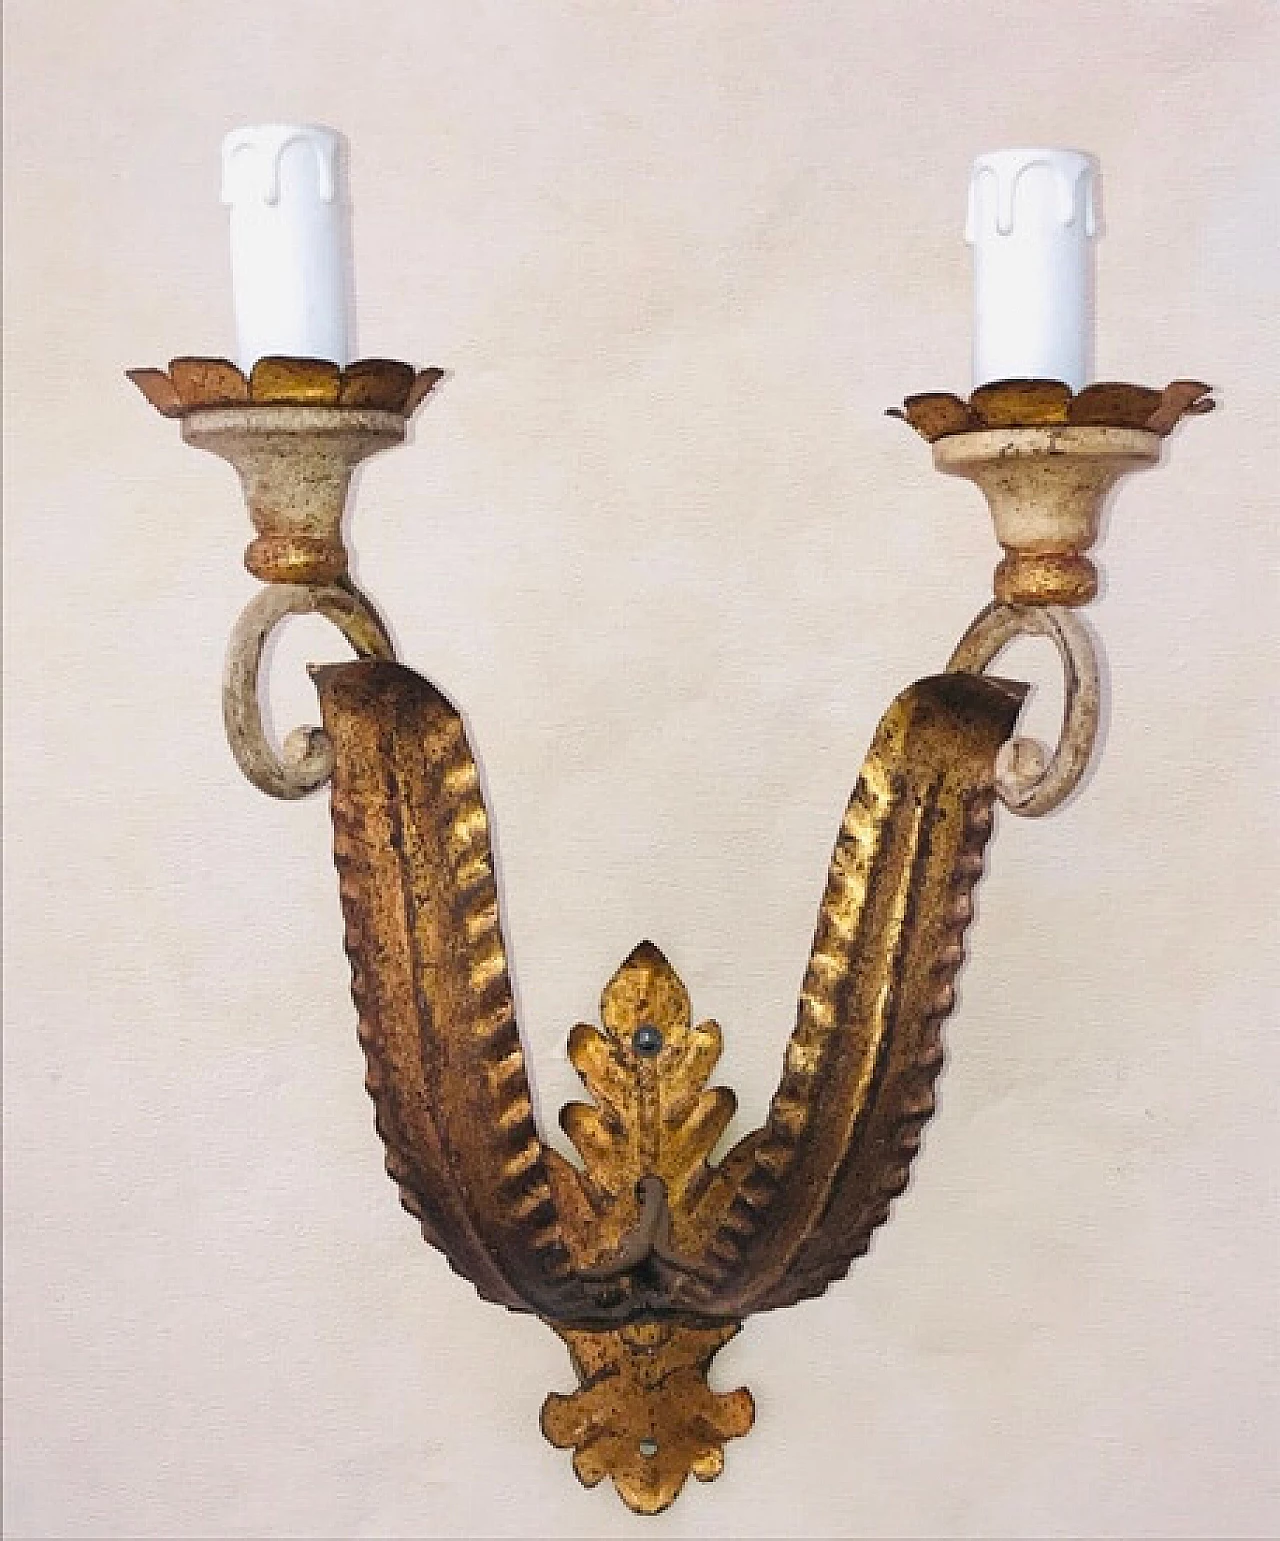 Pair of metal wall sconces with golden imperial style leaves, 20th century 1104072